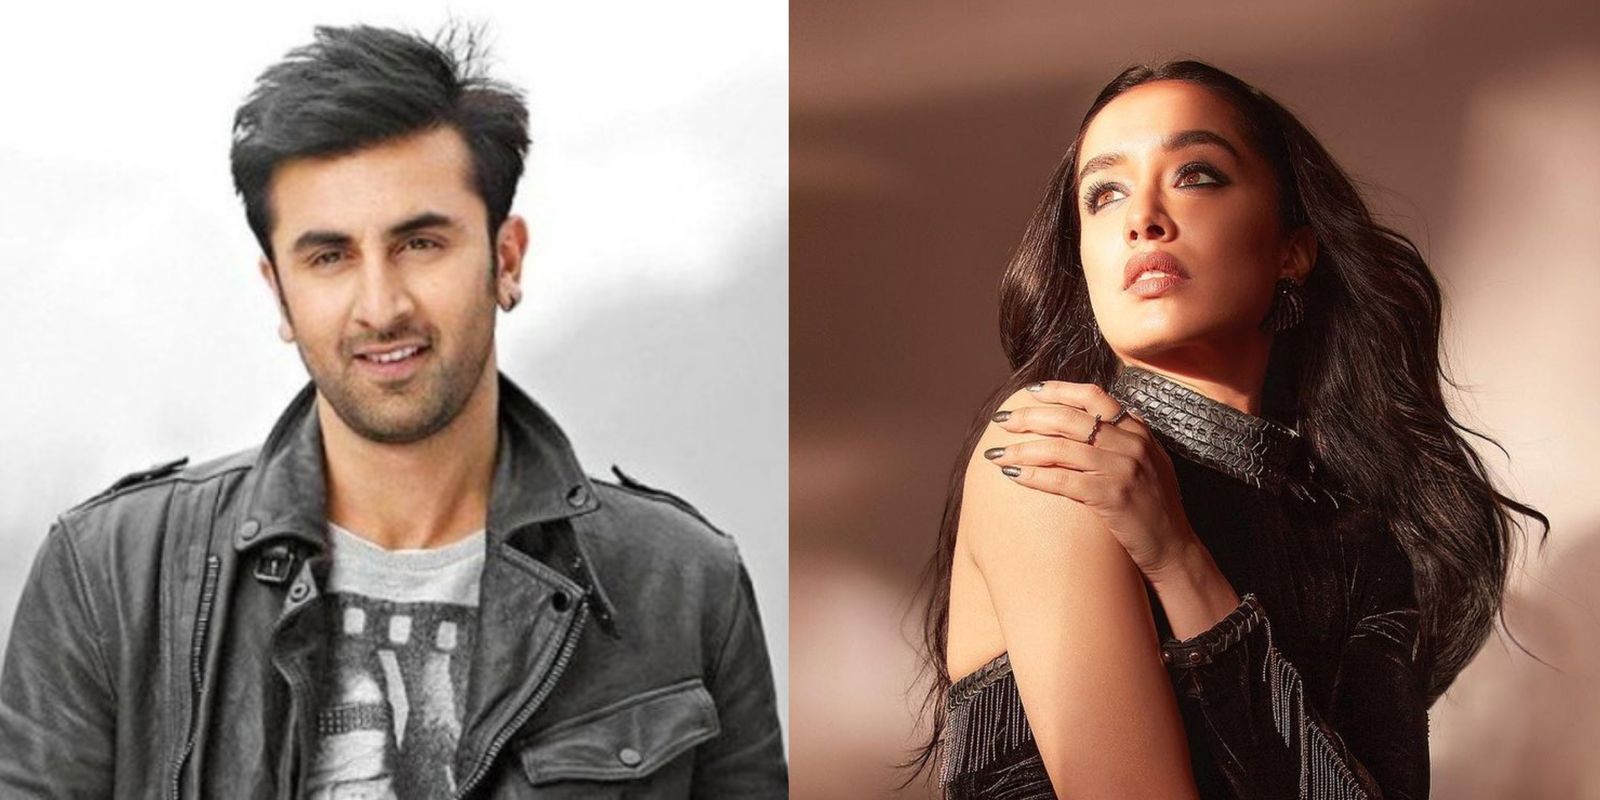 Ranbir Kapoor And Shraddha Kapoor’s Rom Com To Resume In June; Team Will Travel To Spain Later This Year